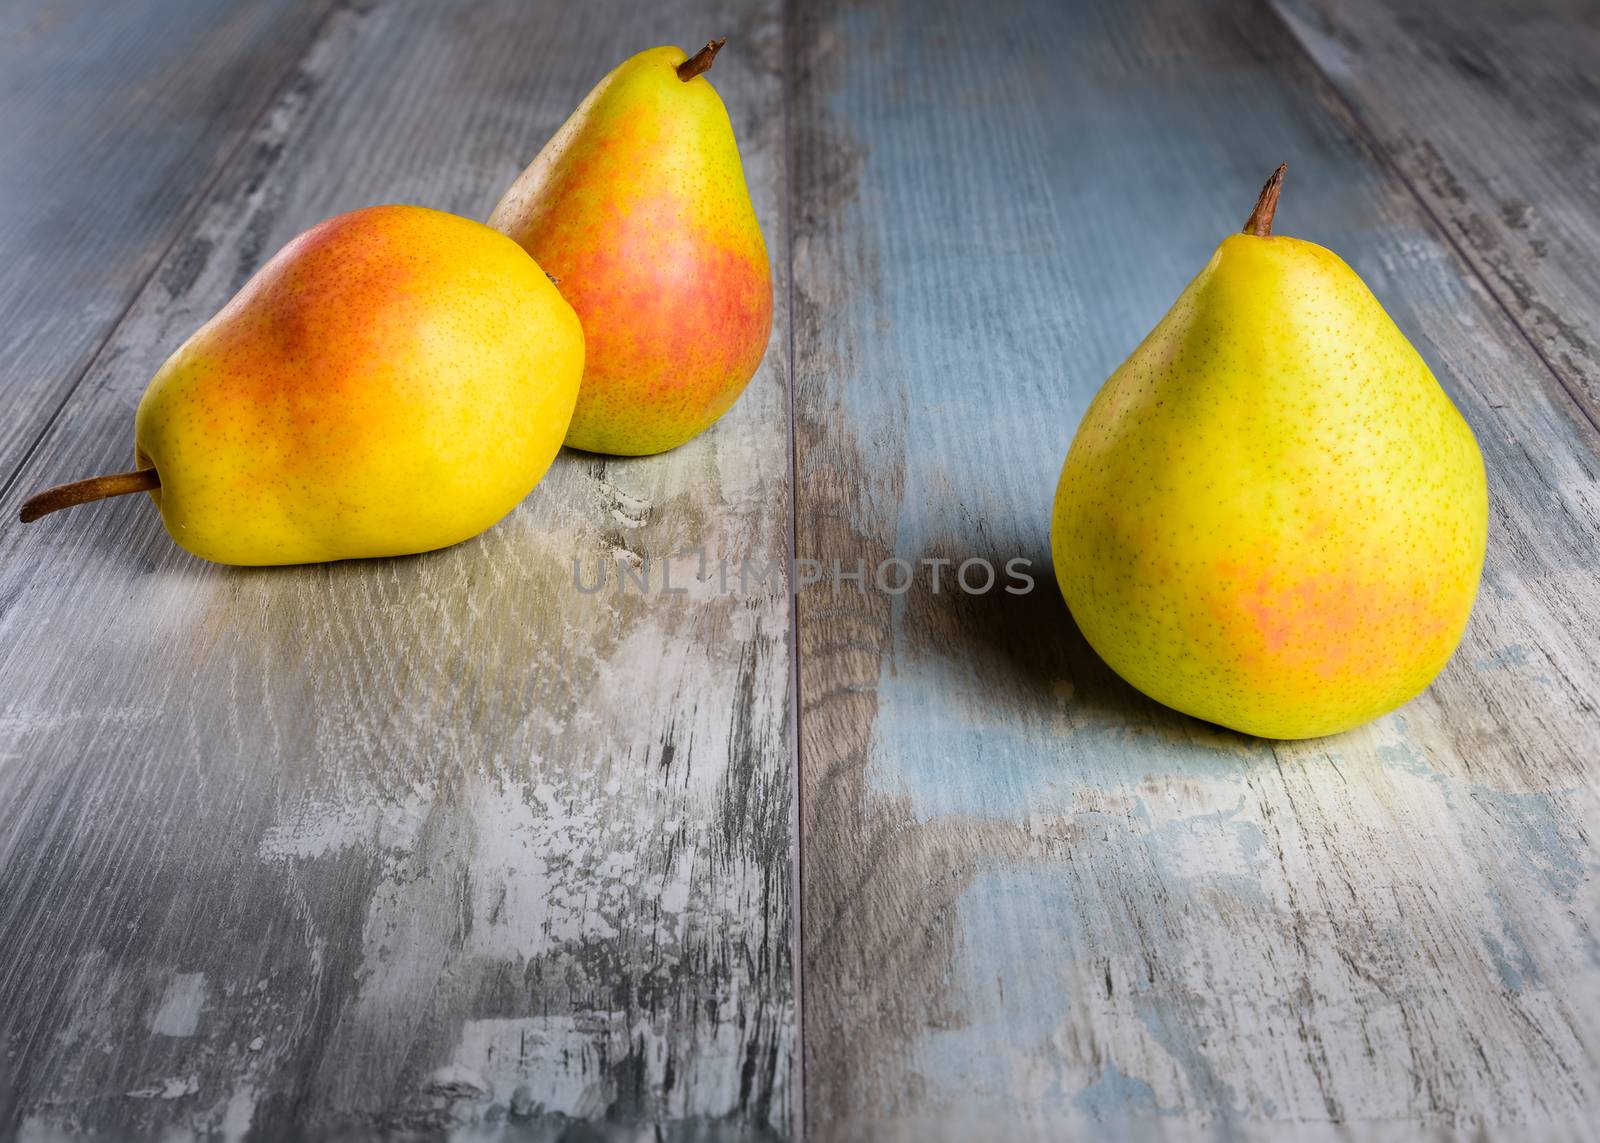 Pears on an old wooden by Robertobinetti70